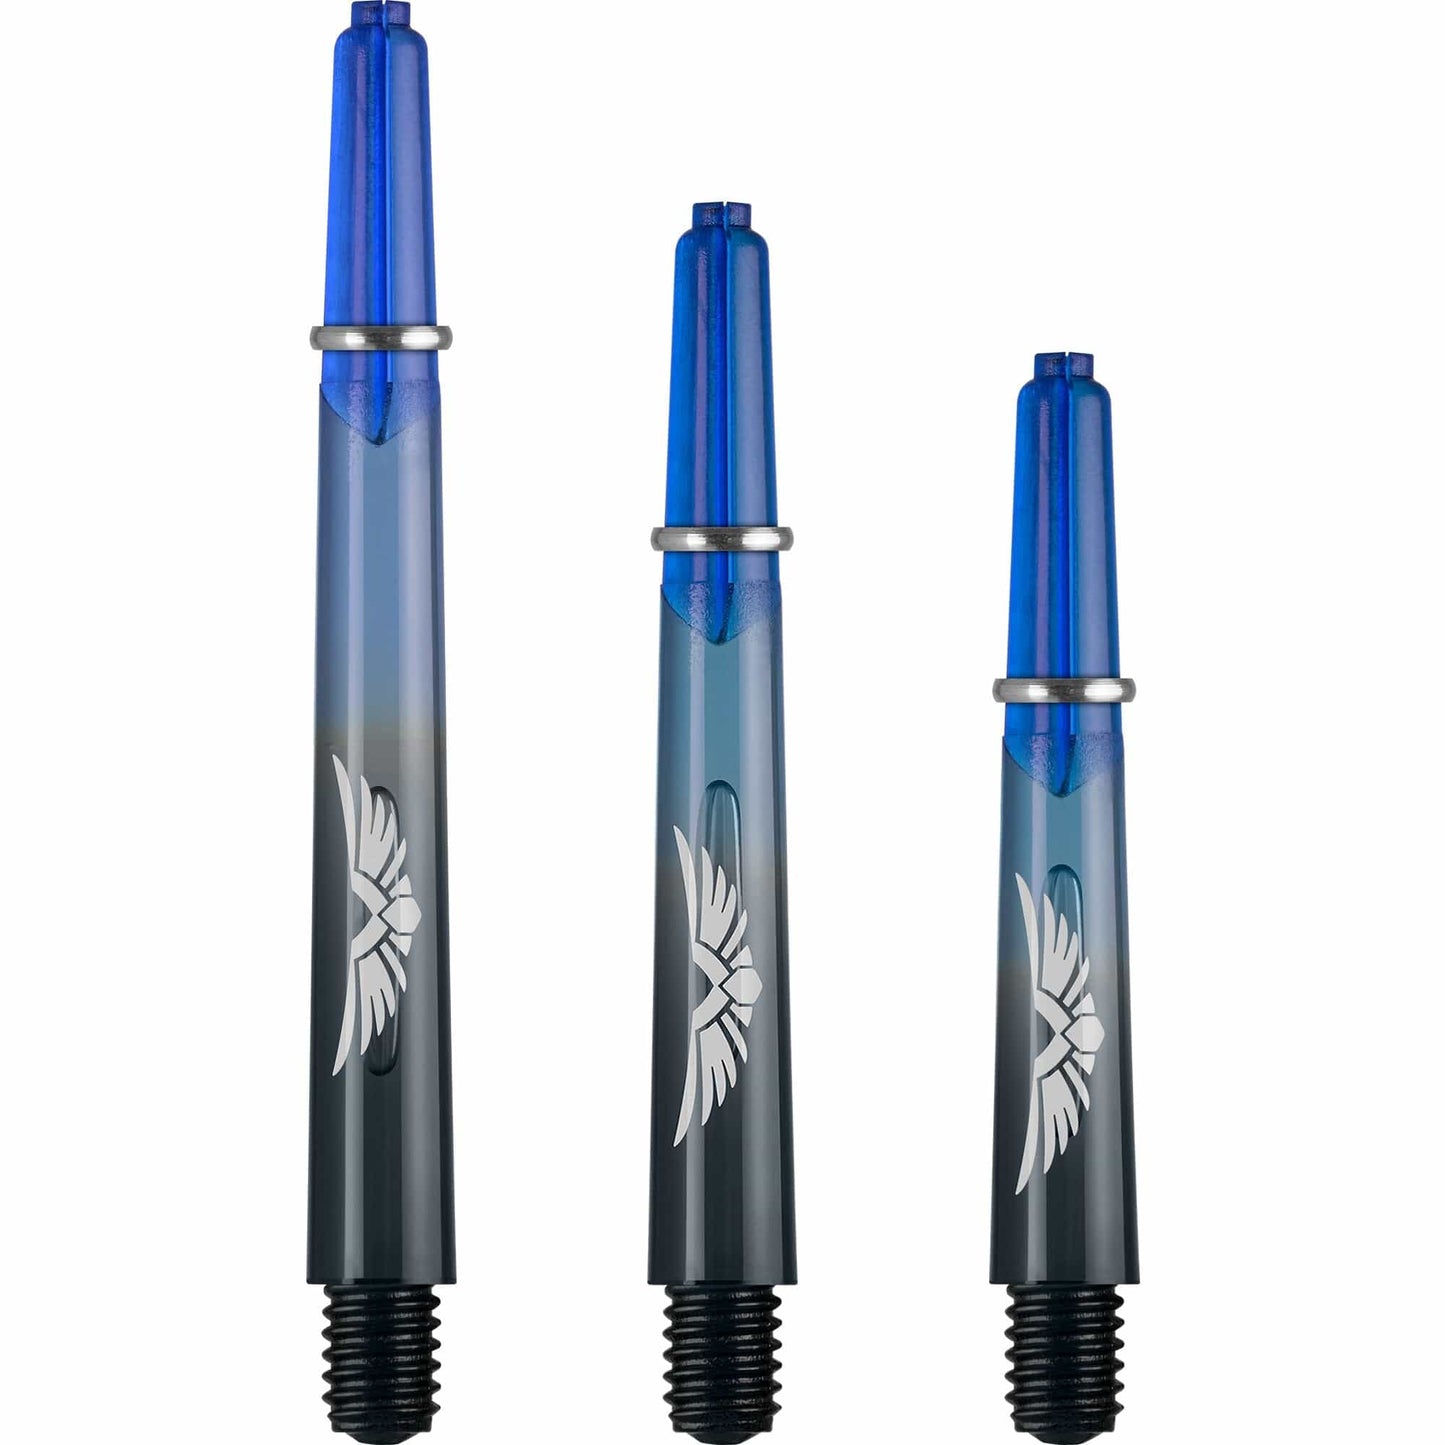 Shot Eagle Claw Dart Shafts - with Machined Rings - Strong Polycarbonate Stems - Black Blue